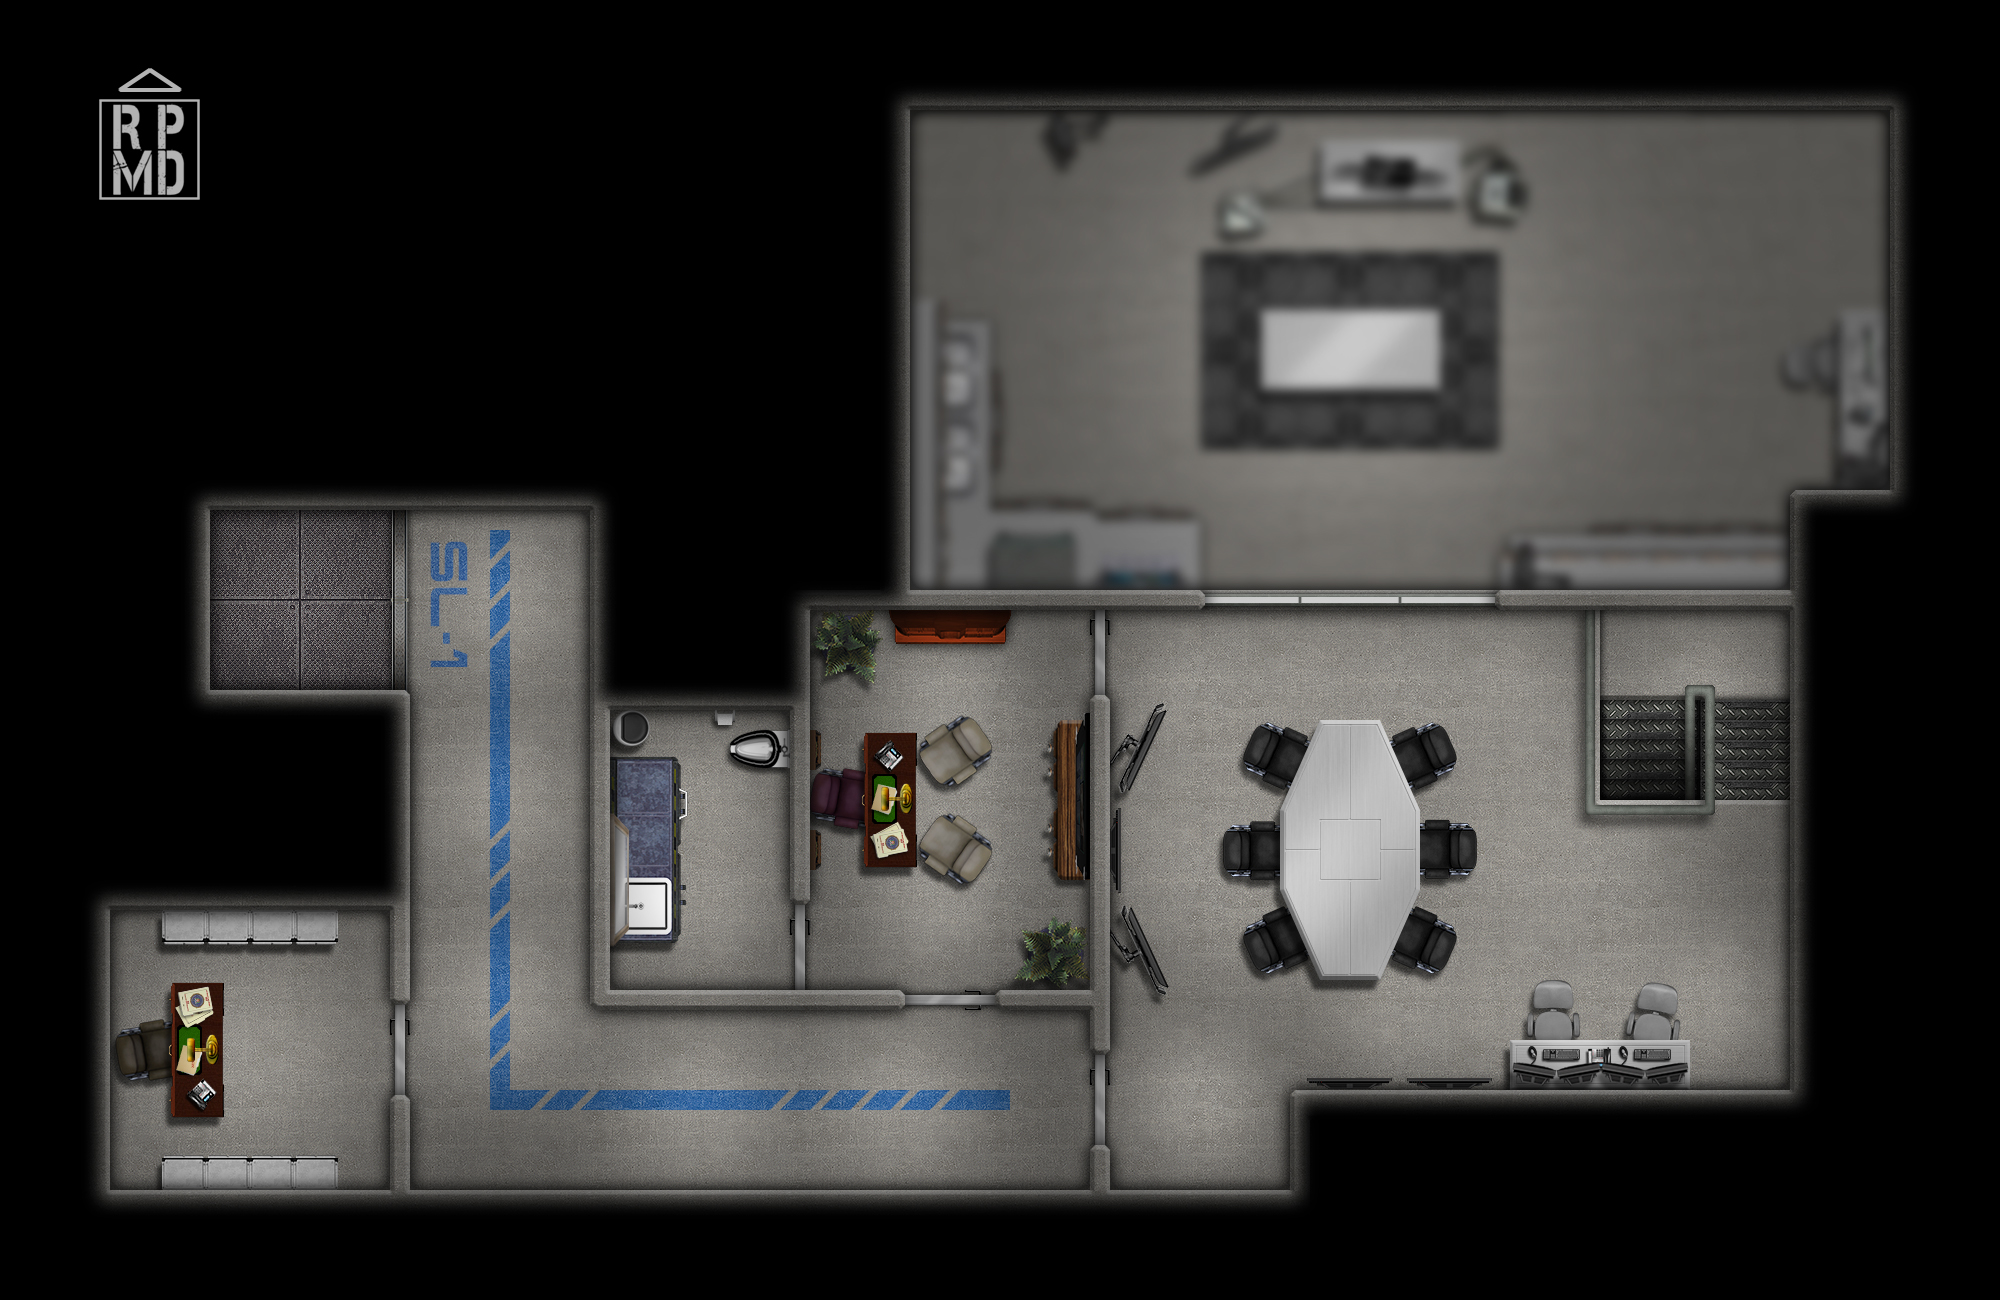 military_bio_research_base__sub_level_1_by_ronpeppermd_de25le5.jpg